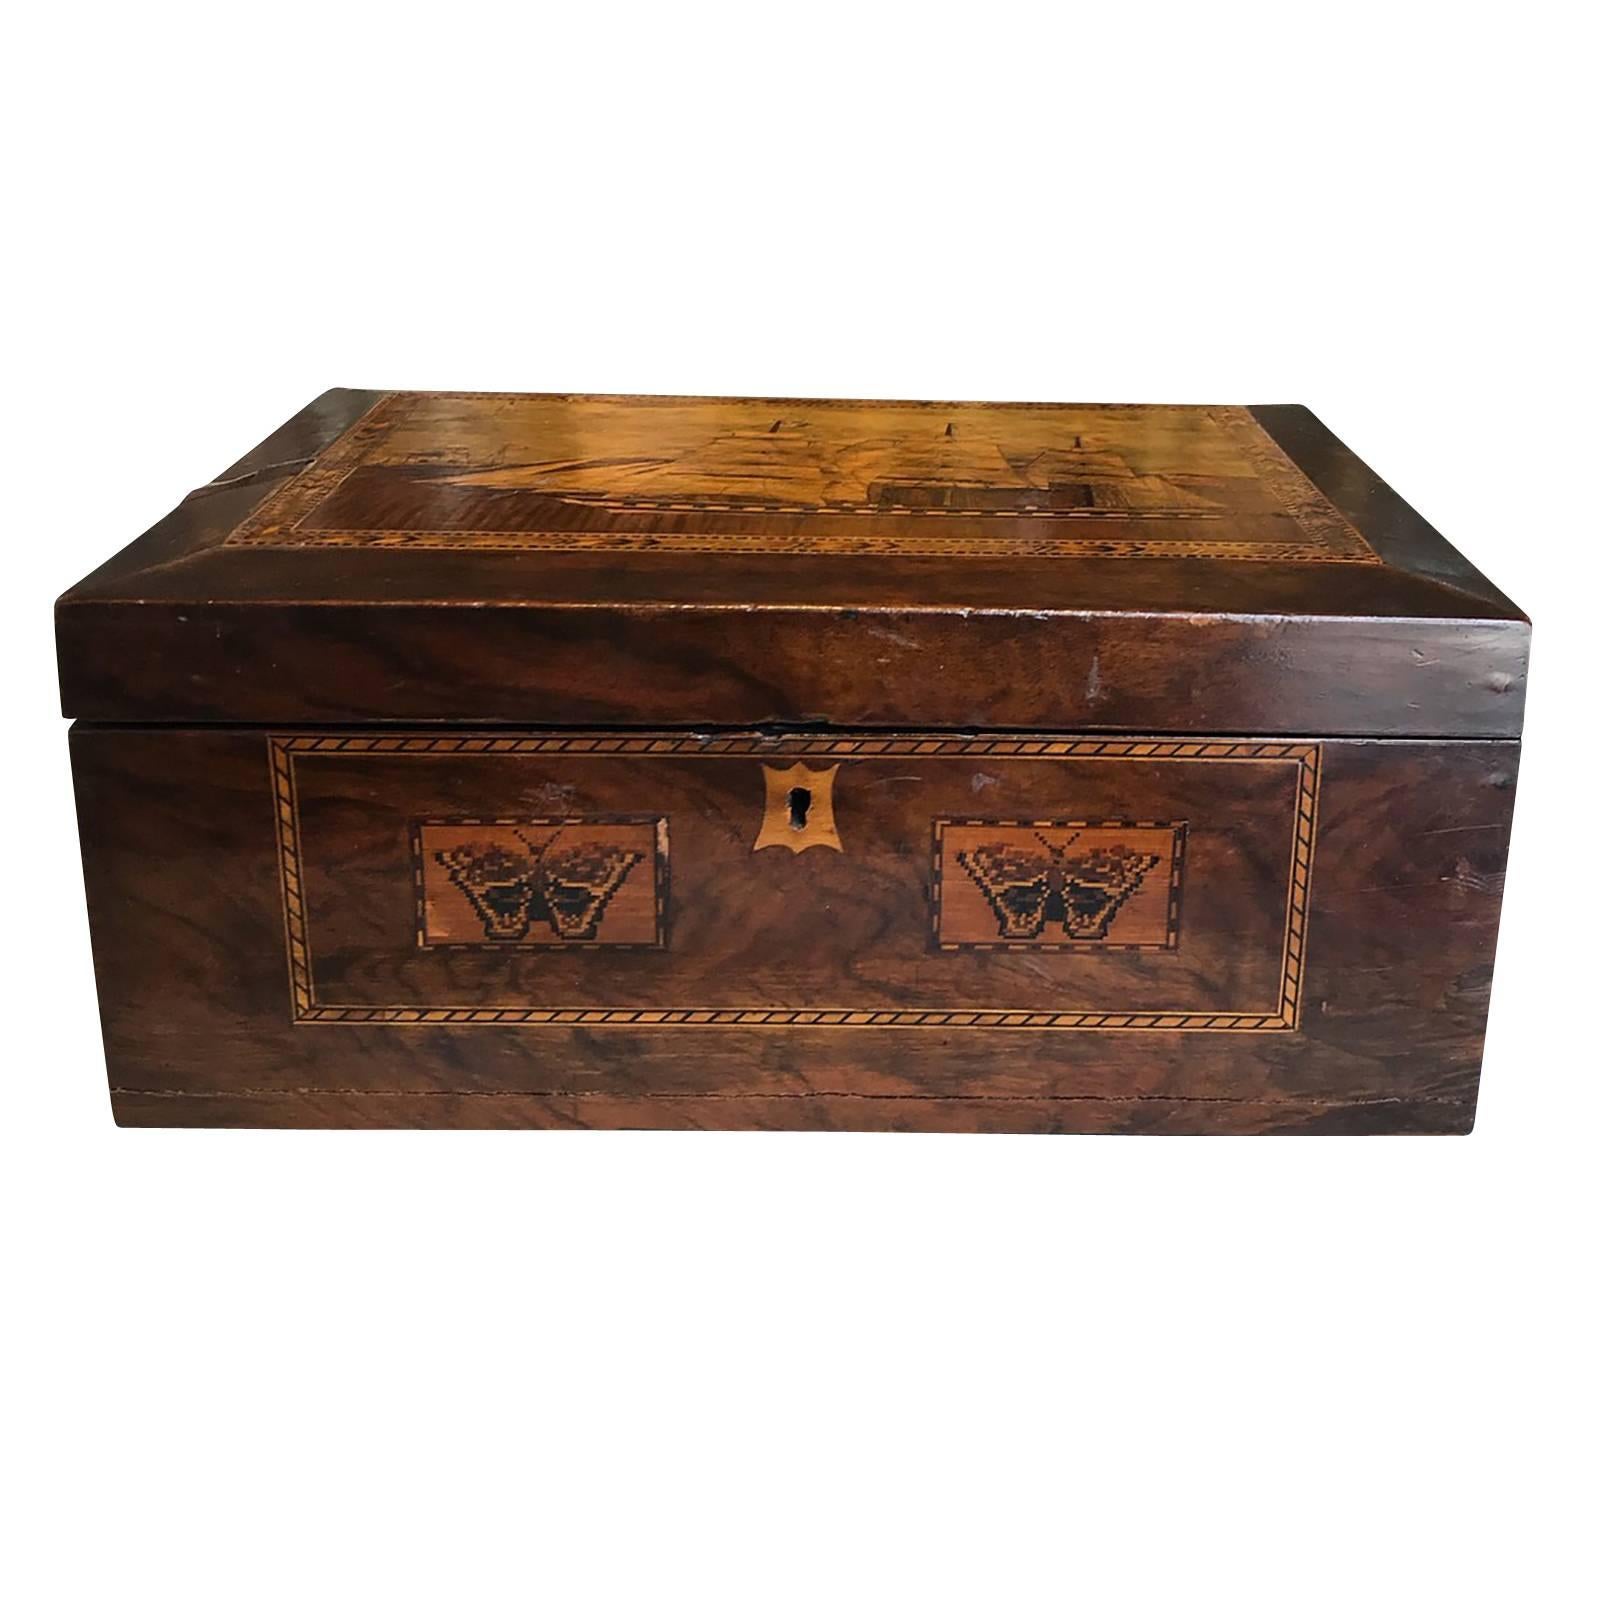 19th Century Wooden Sewing Box with Ship Inlaid